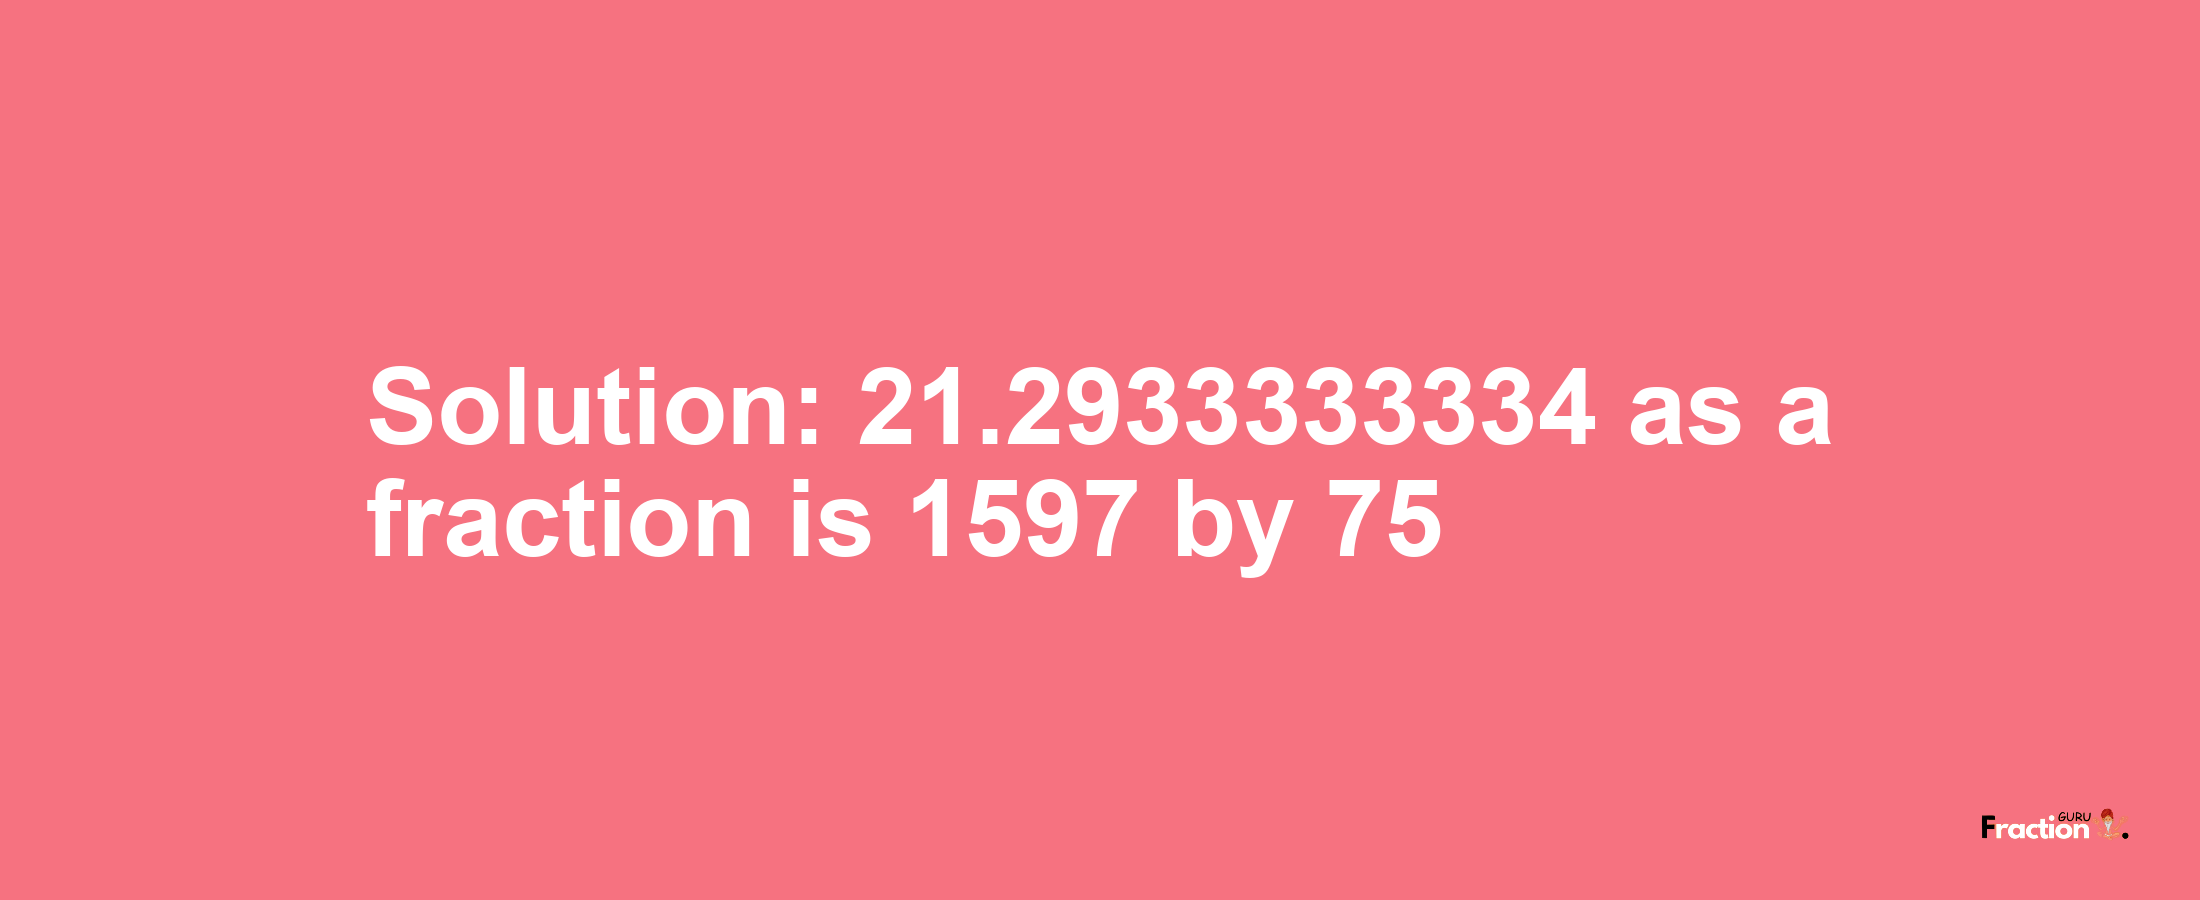 Solution:21.2933333334 as a fraction is 1597/75